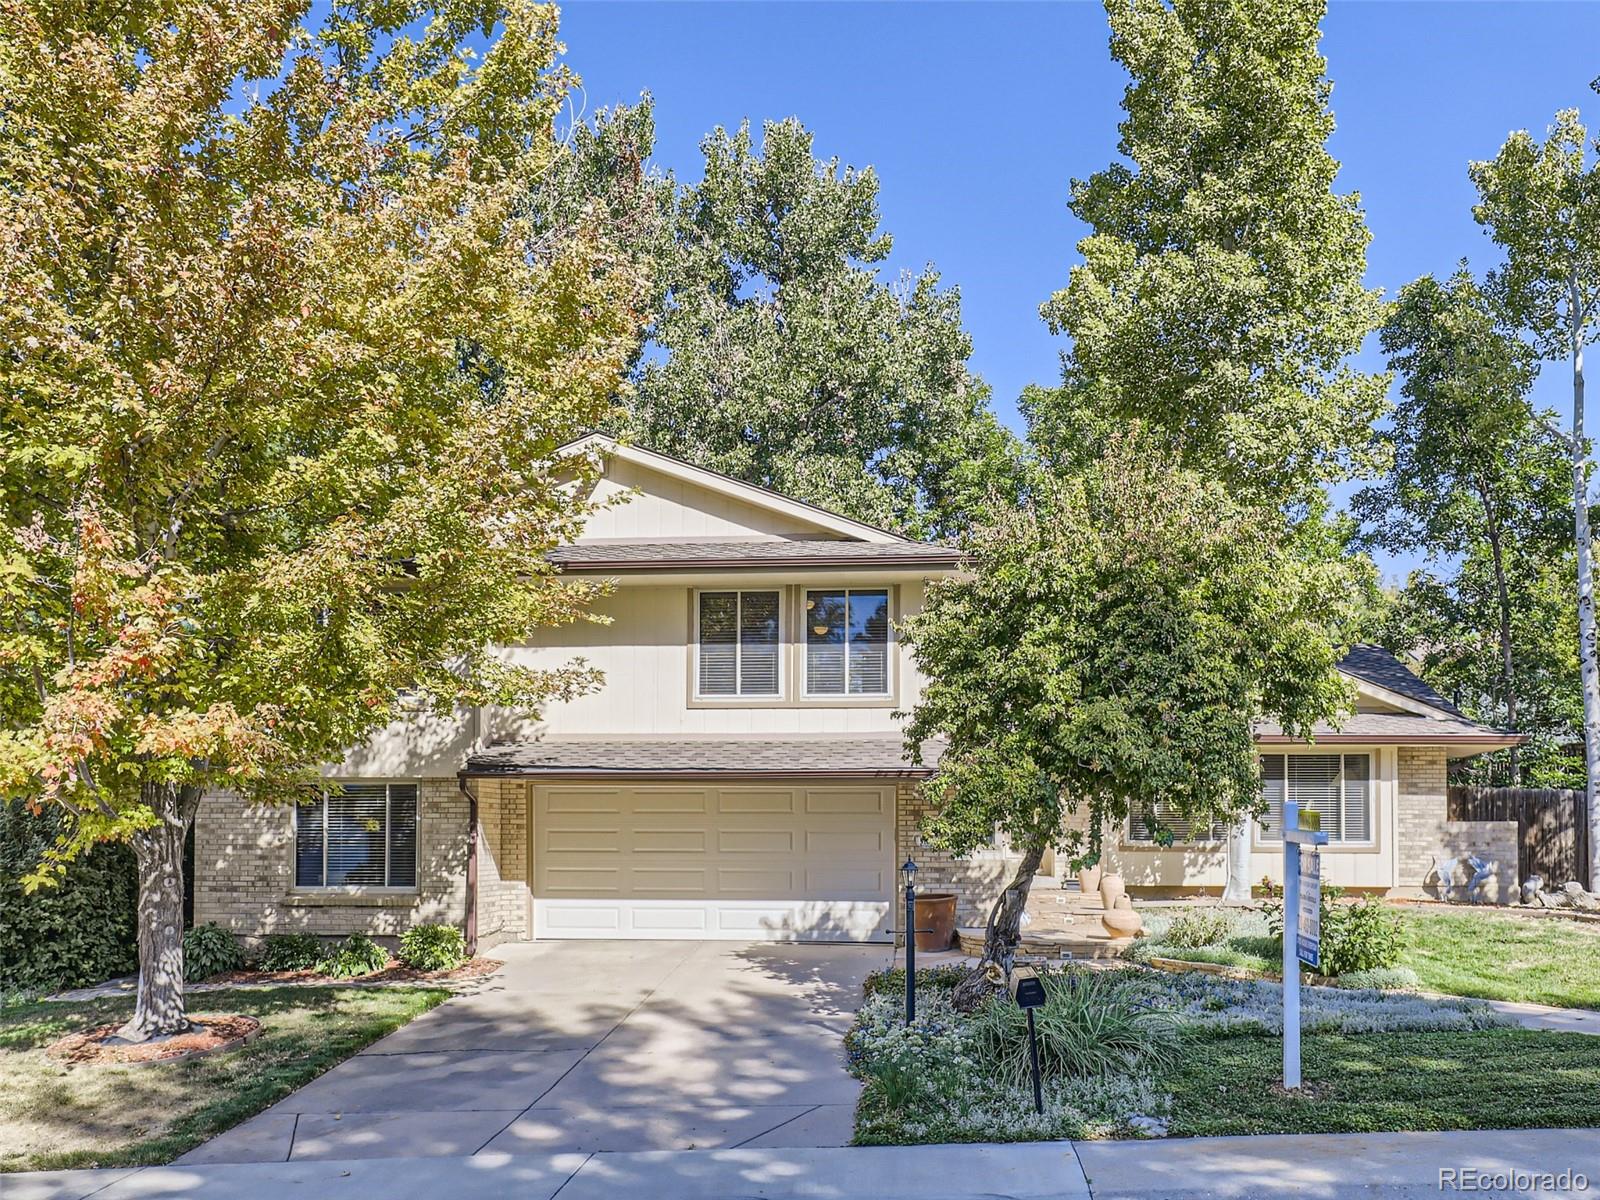 5189 e maplewood place, Centennial sold home. Closed on 2024-01-17 for $745,000.